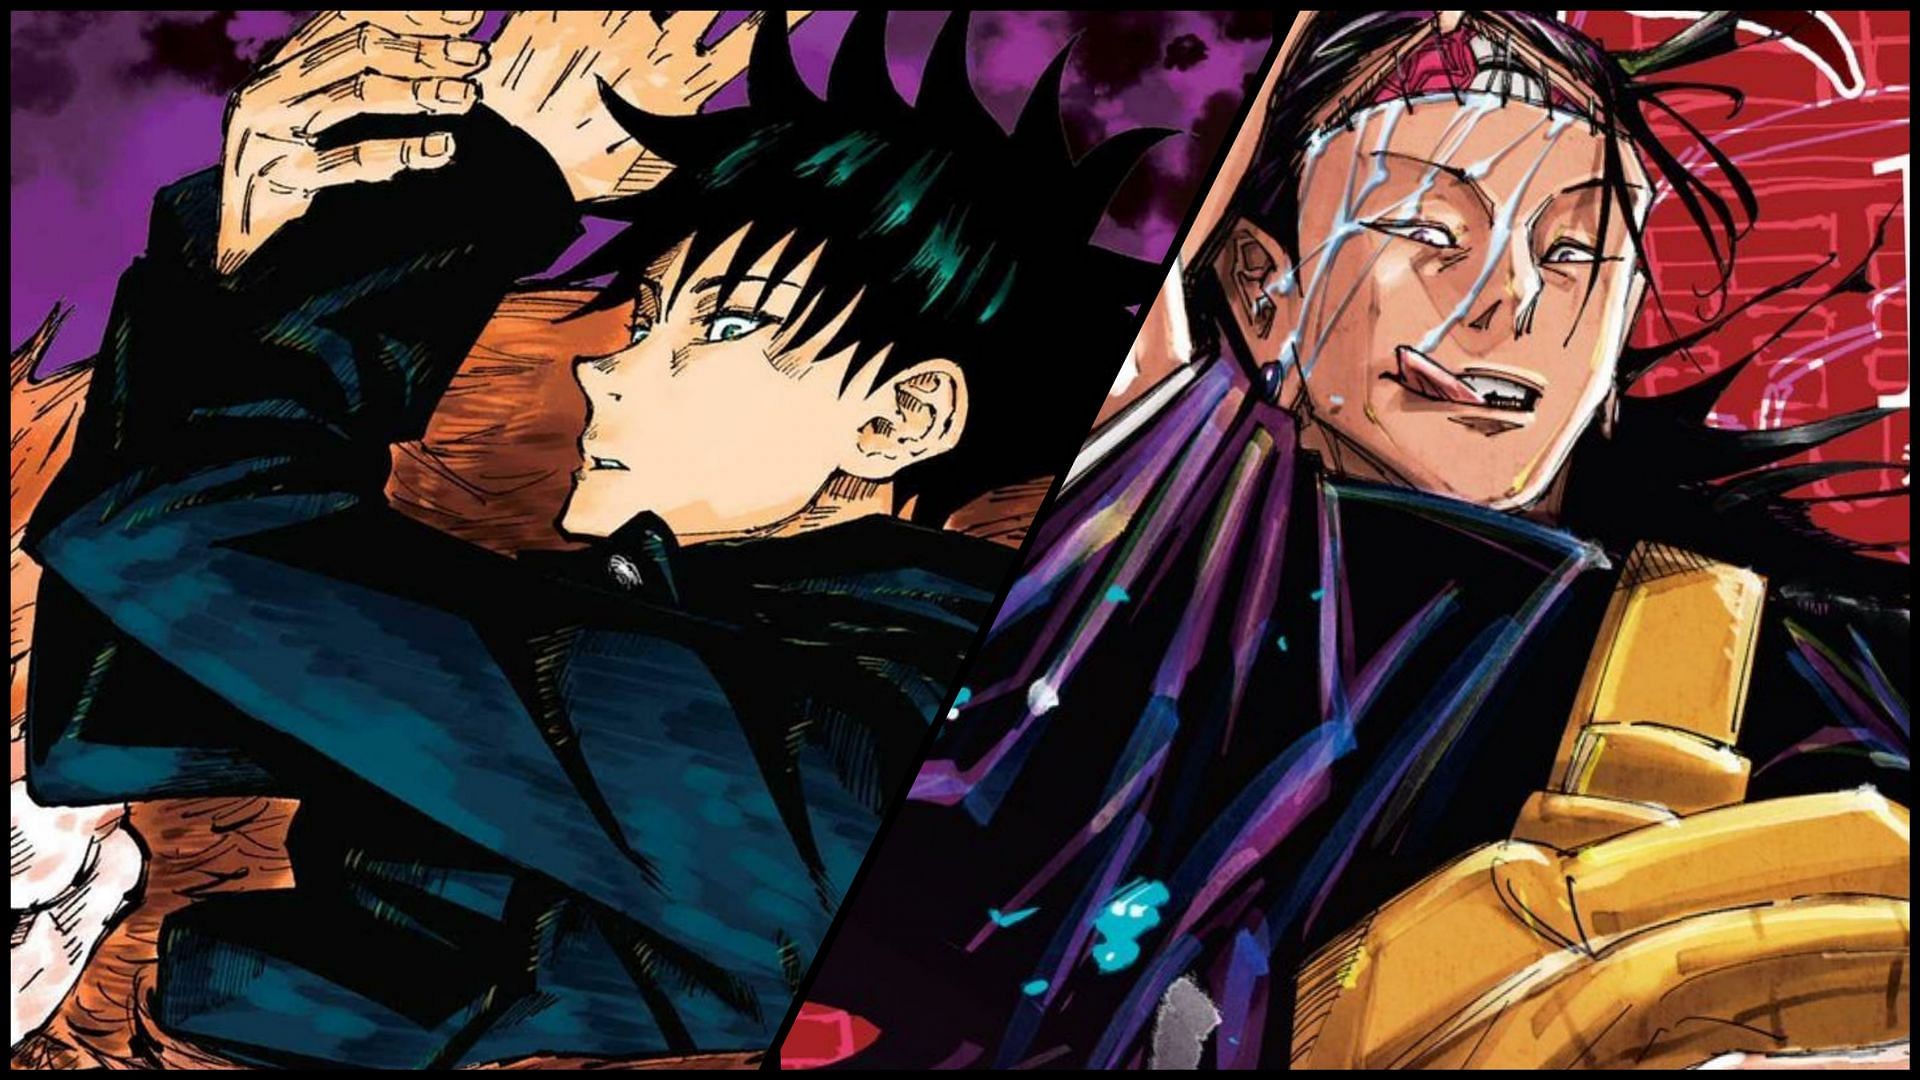 The ENTIRE Jujutsu Kaisen Culling Game Arc Explained 